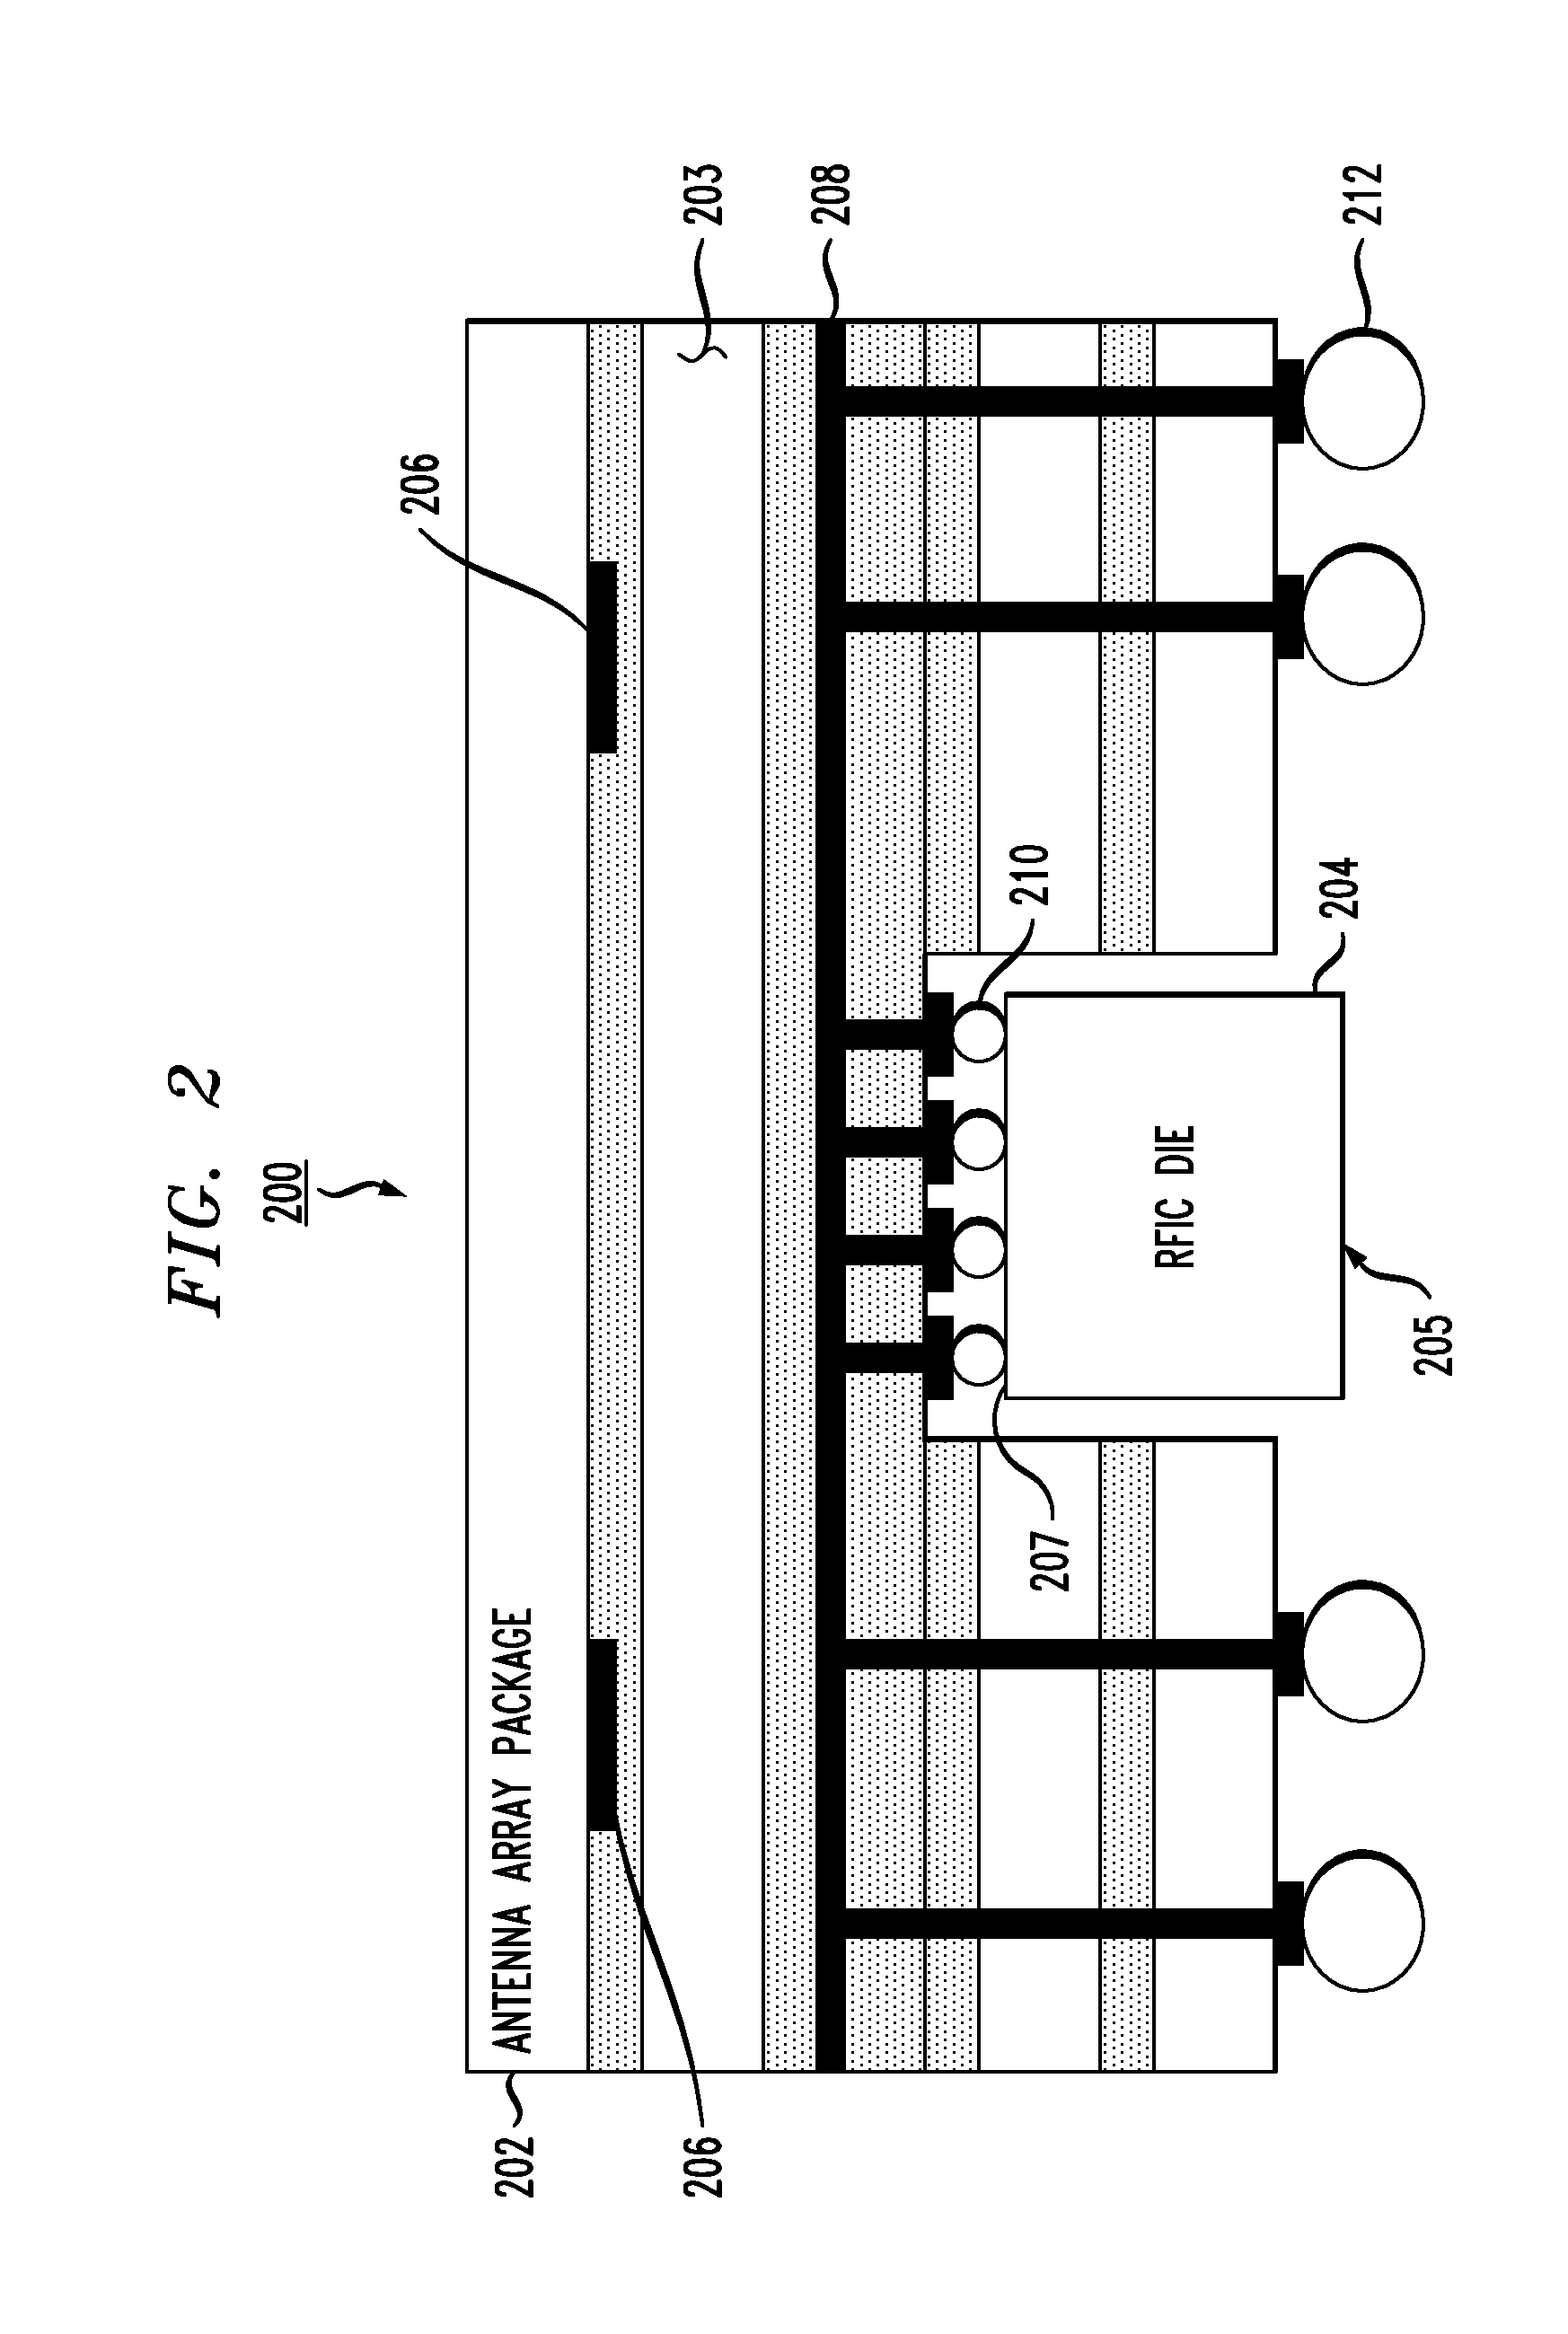 Thermal interface material application for integrated circuit cooling